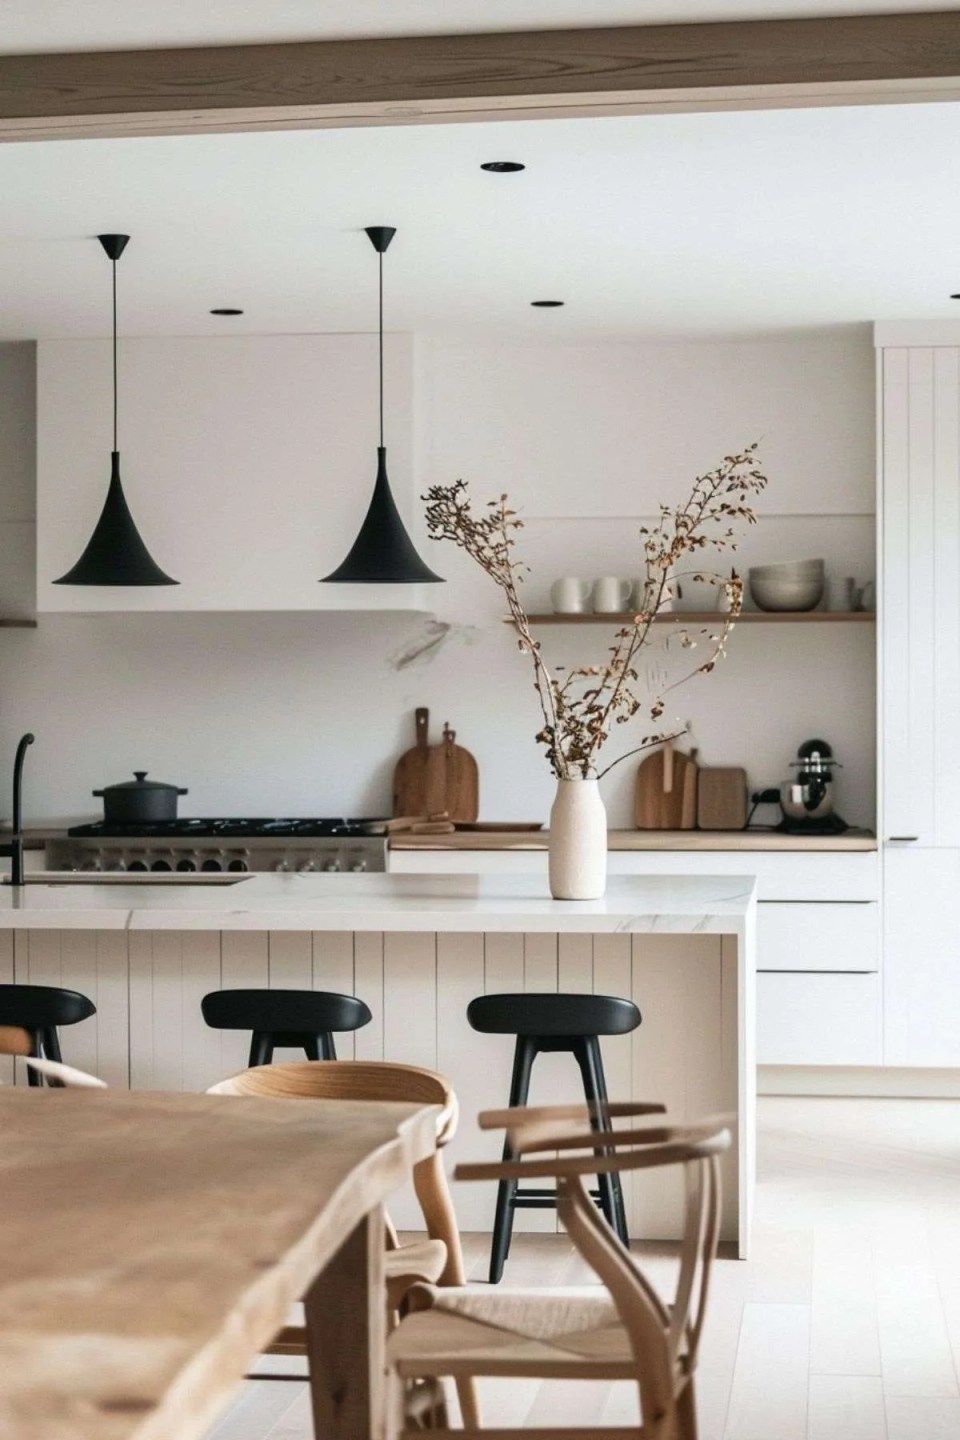 Simple Scandinavian Kitchen Inspirations Effortlessly Stylish Nordic Kitchen Ideas for a Clean and Minimalist Space